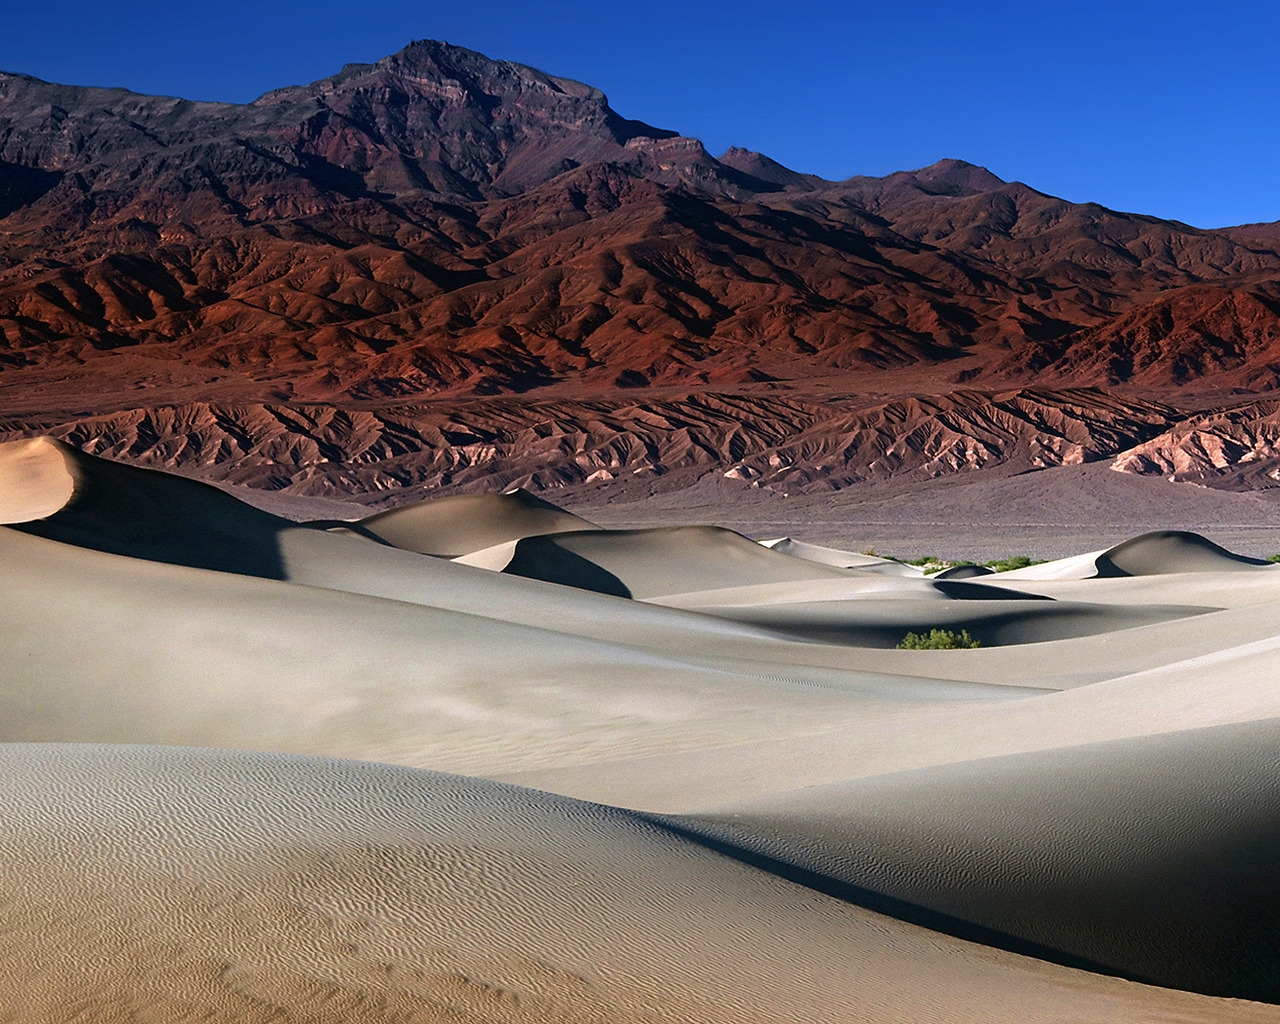 The Mesquite Dunes for 1280 x 1024 resolution